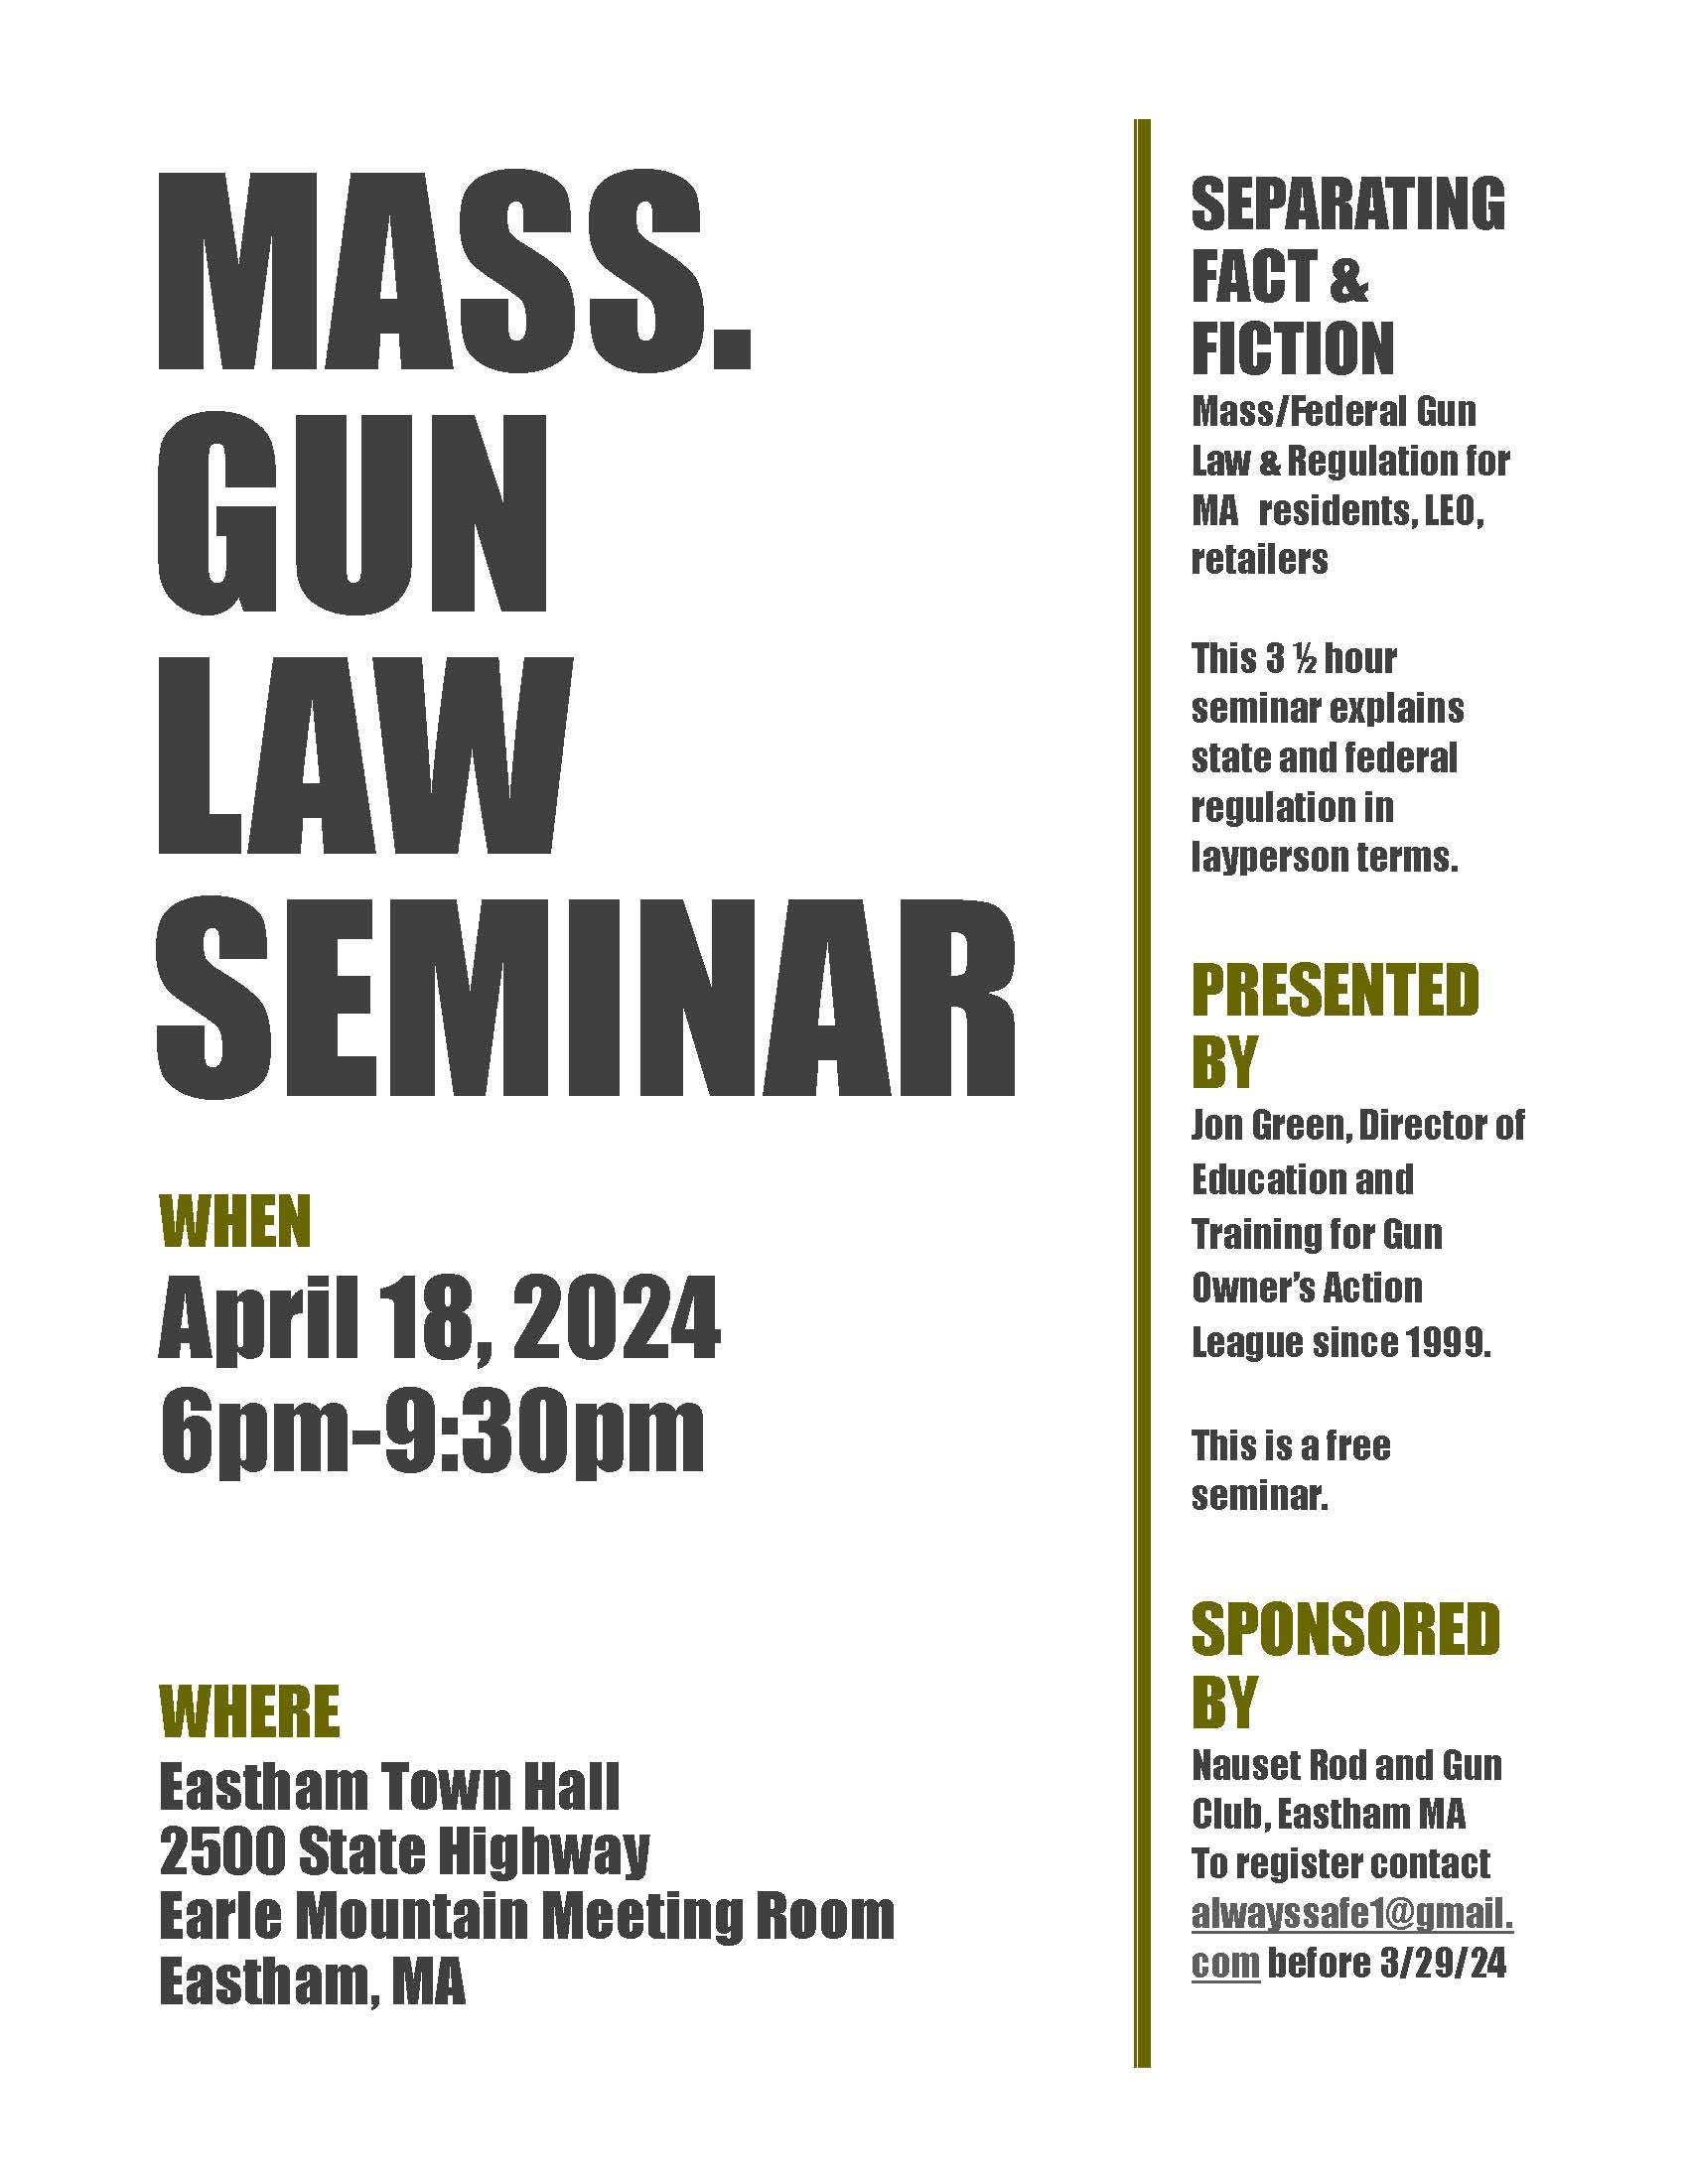 Mass Gun Law Seminar To Be Held April 18th in Eastham